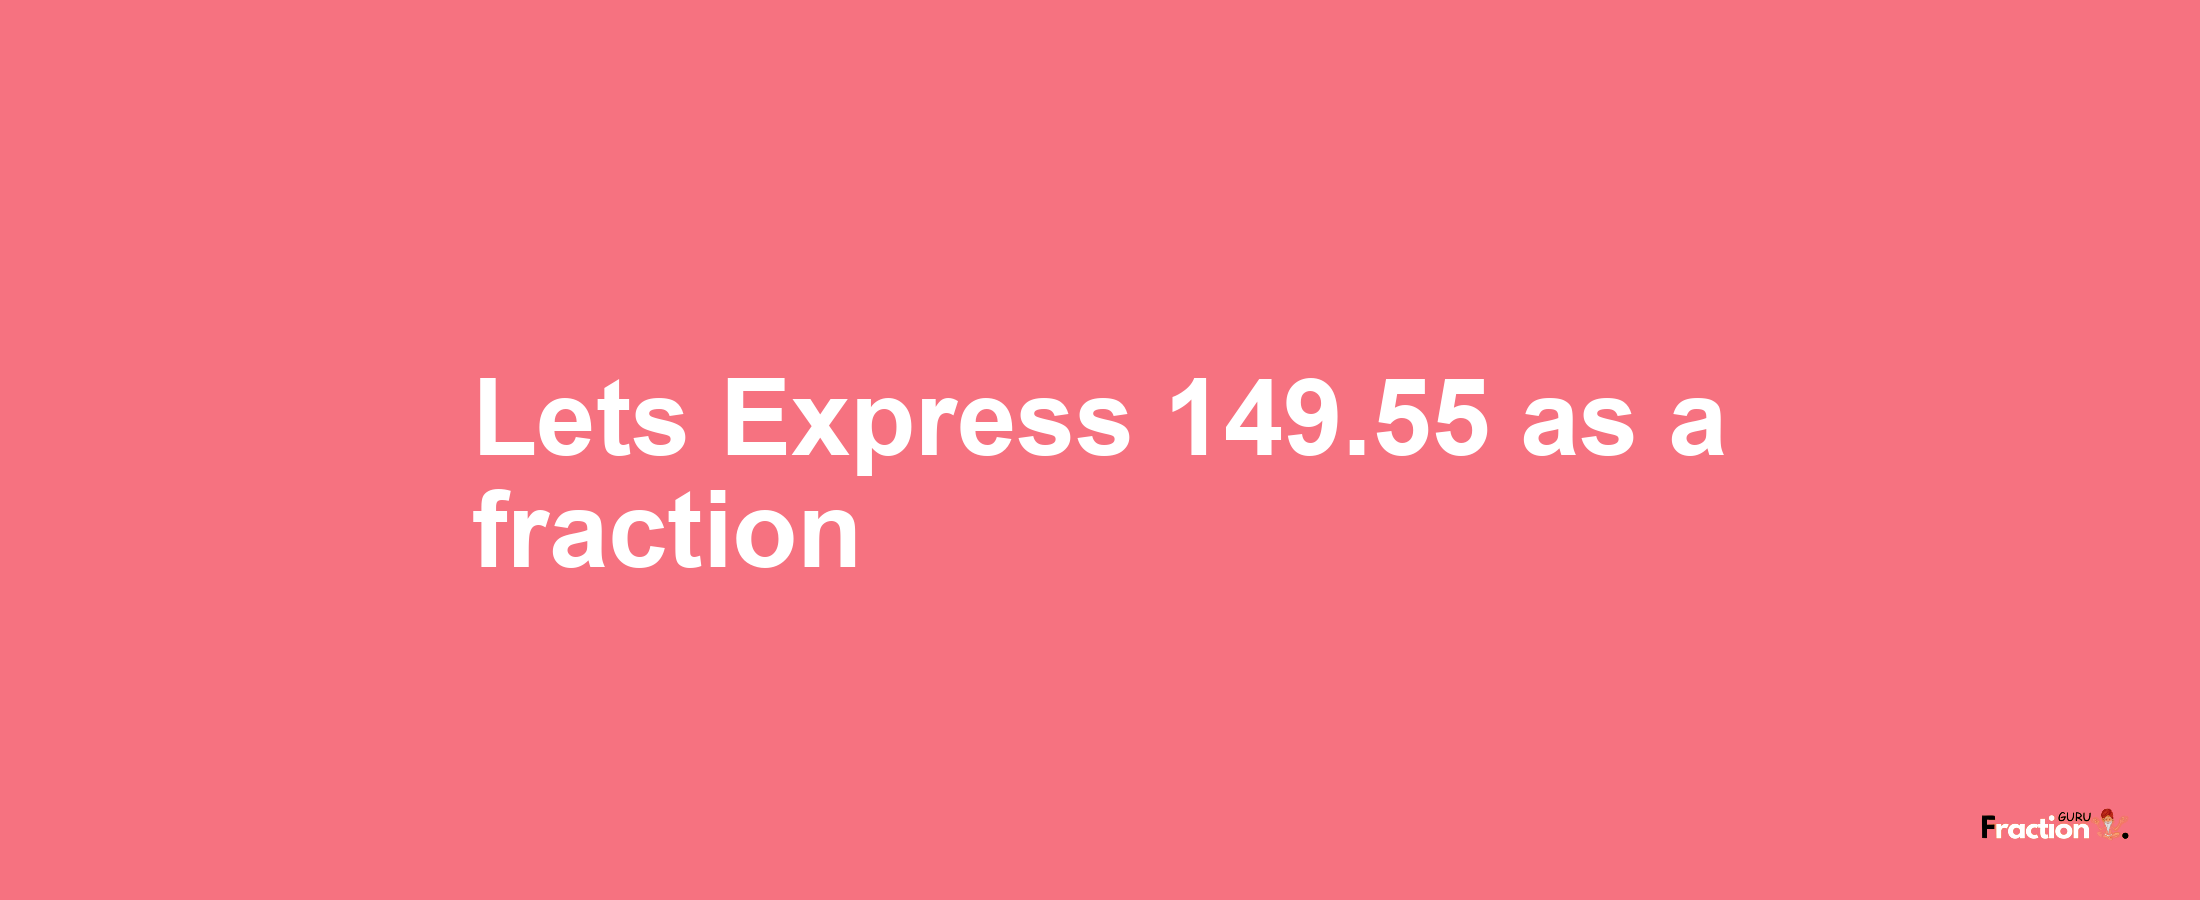 Lets Express 149.55 as afraction